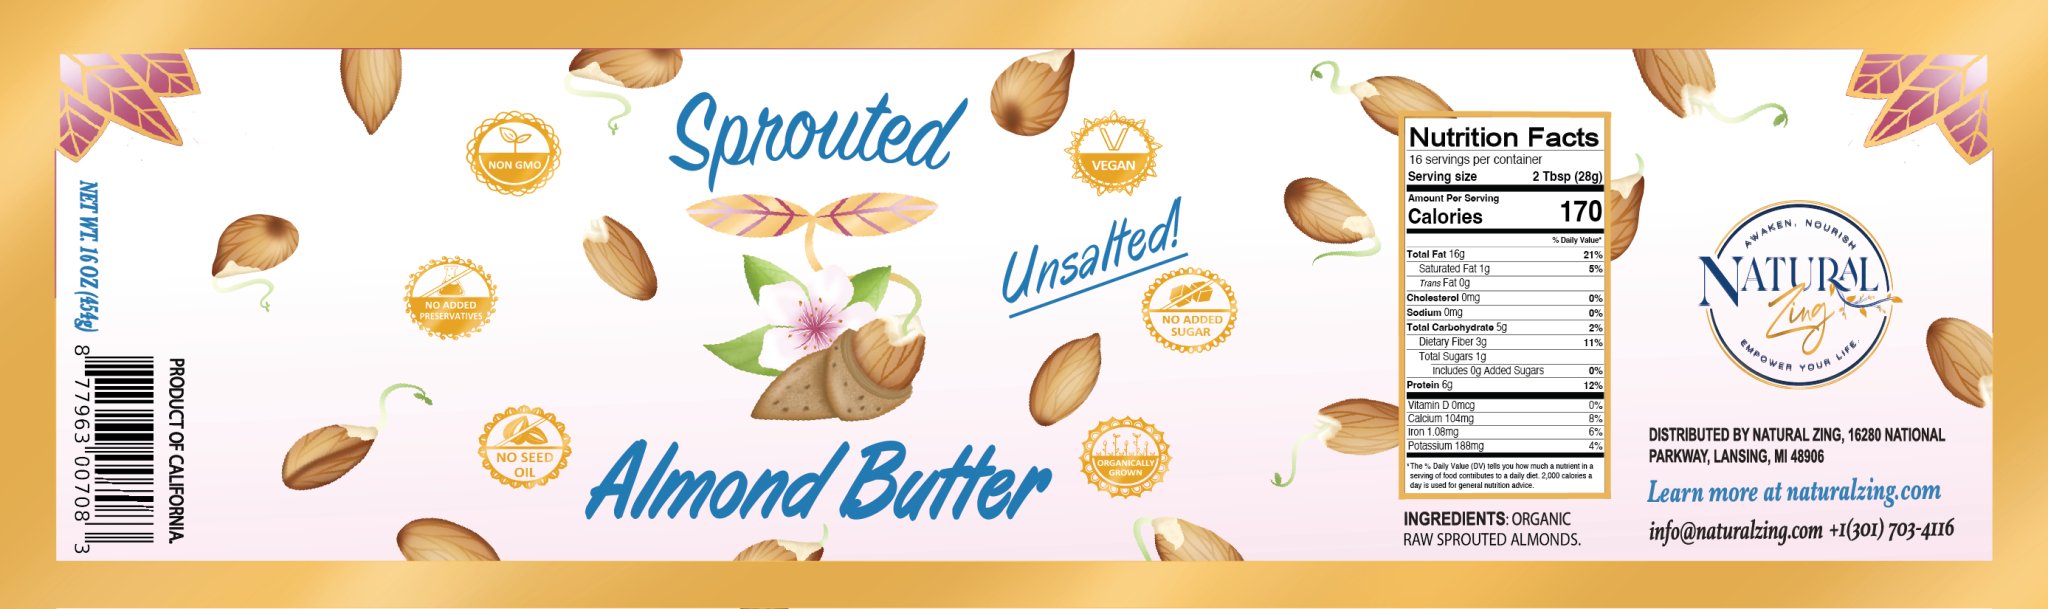 Raw Sprouted Almond Butter 16 oz